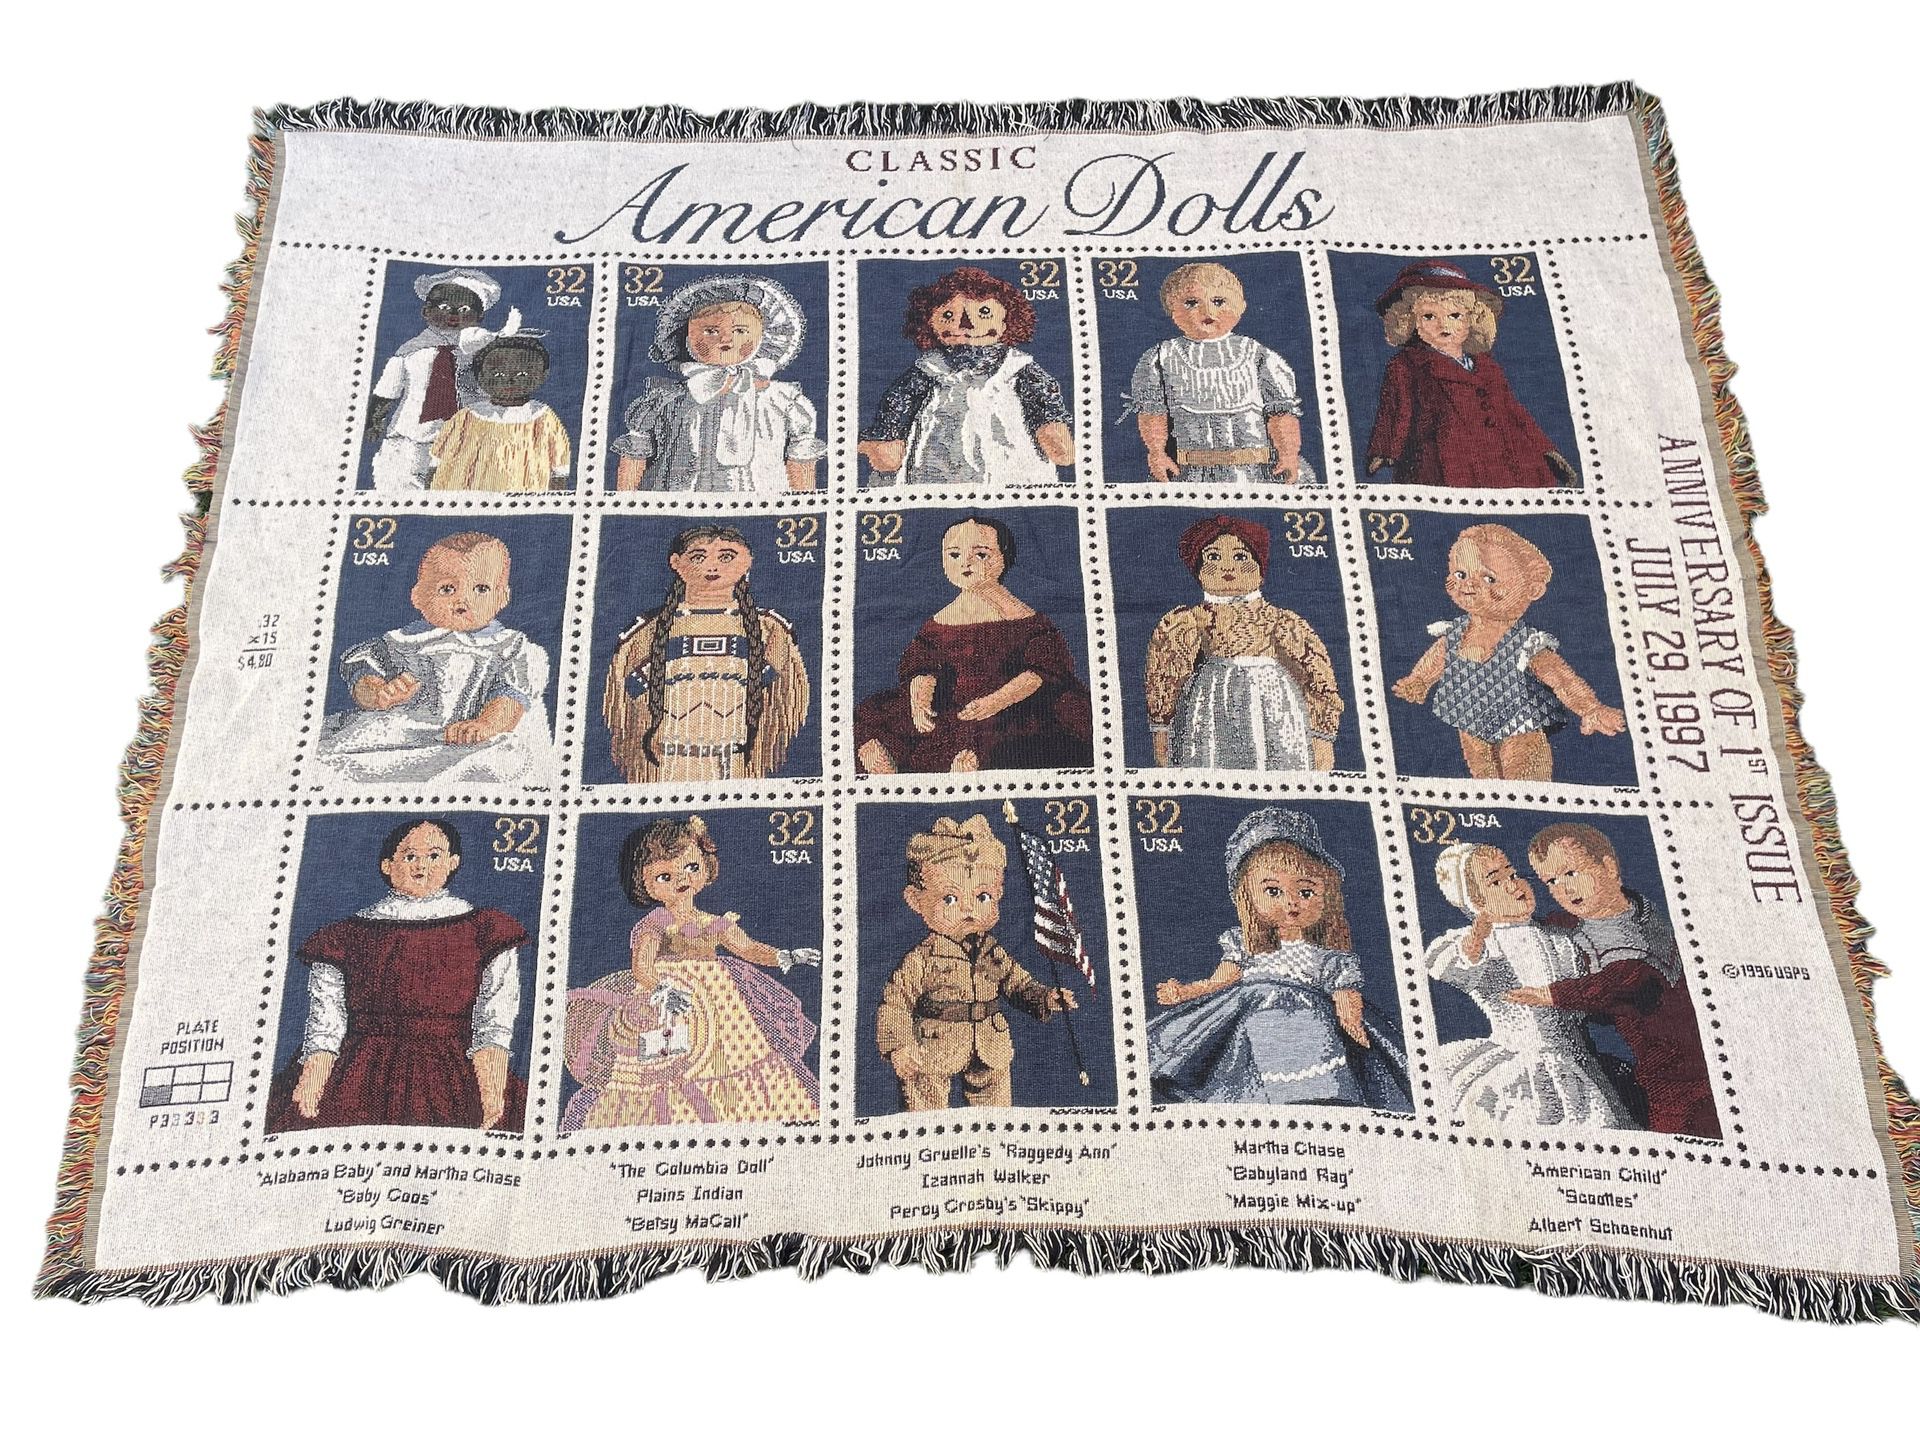 USPS Classic American Dolls Stamps Tapestry Throw Blanket 65"x55" USA 1996